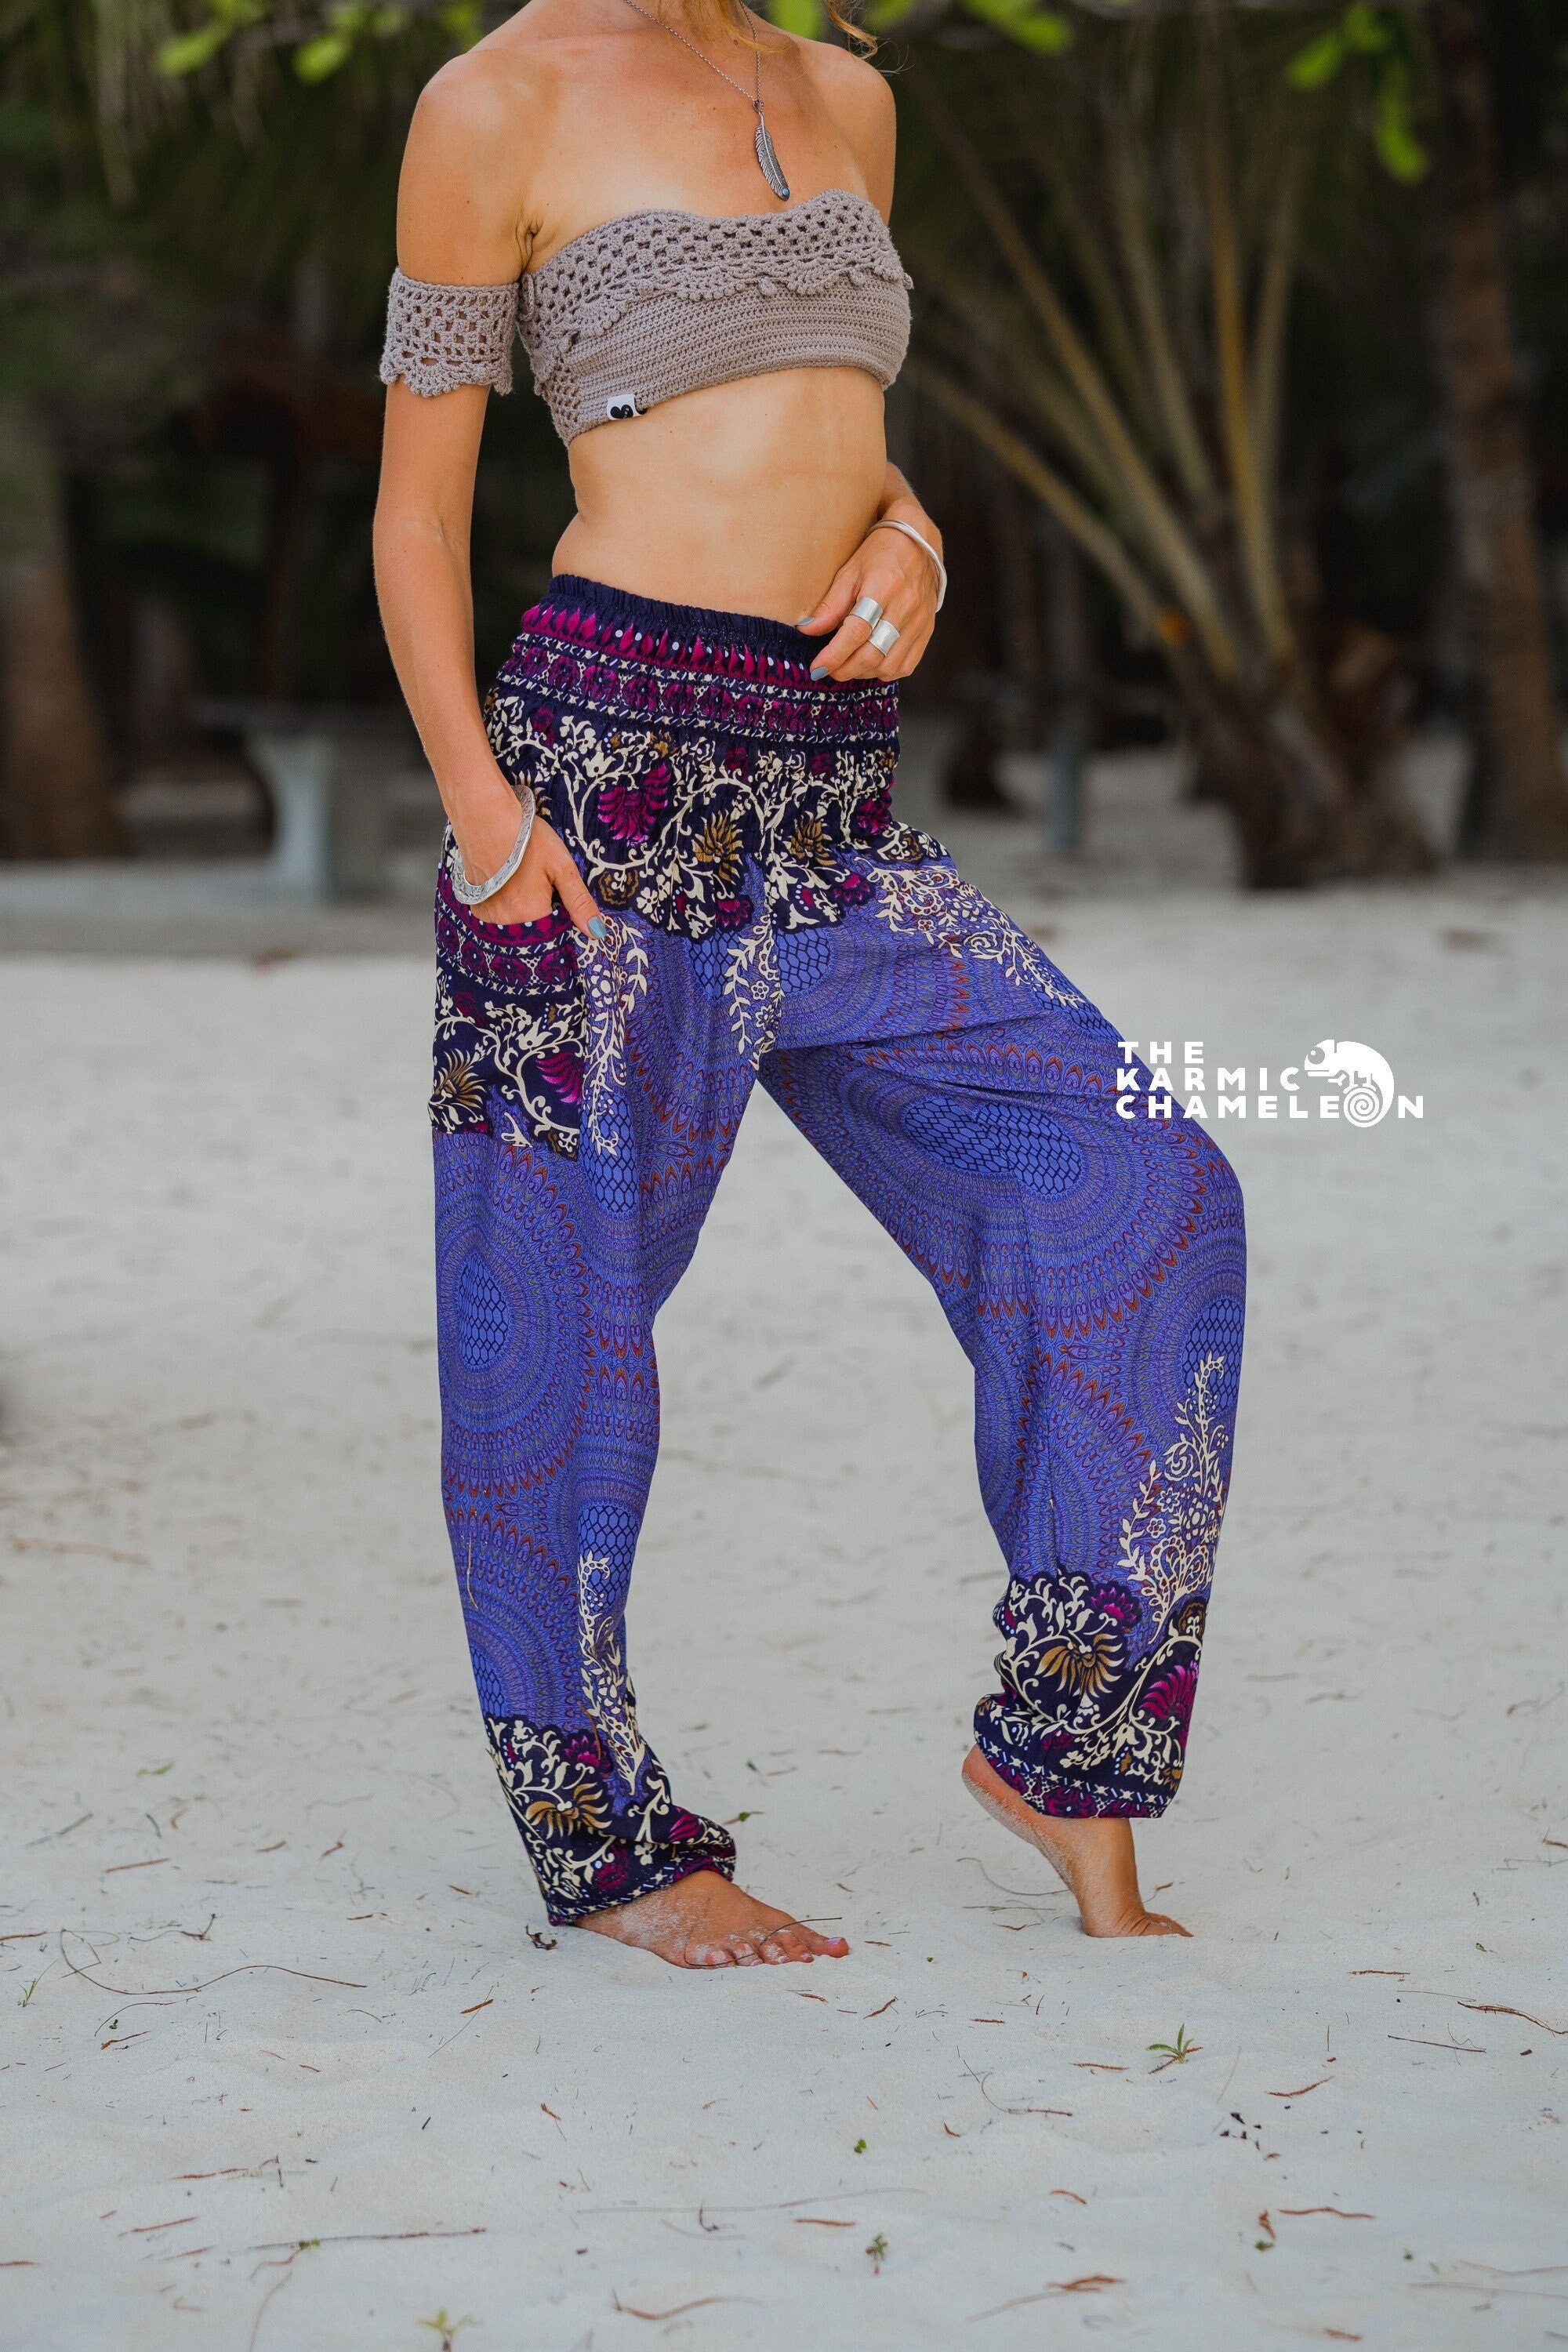 Blue Paisley Trousers – Cariads Clothing